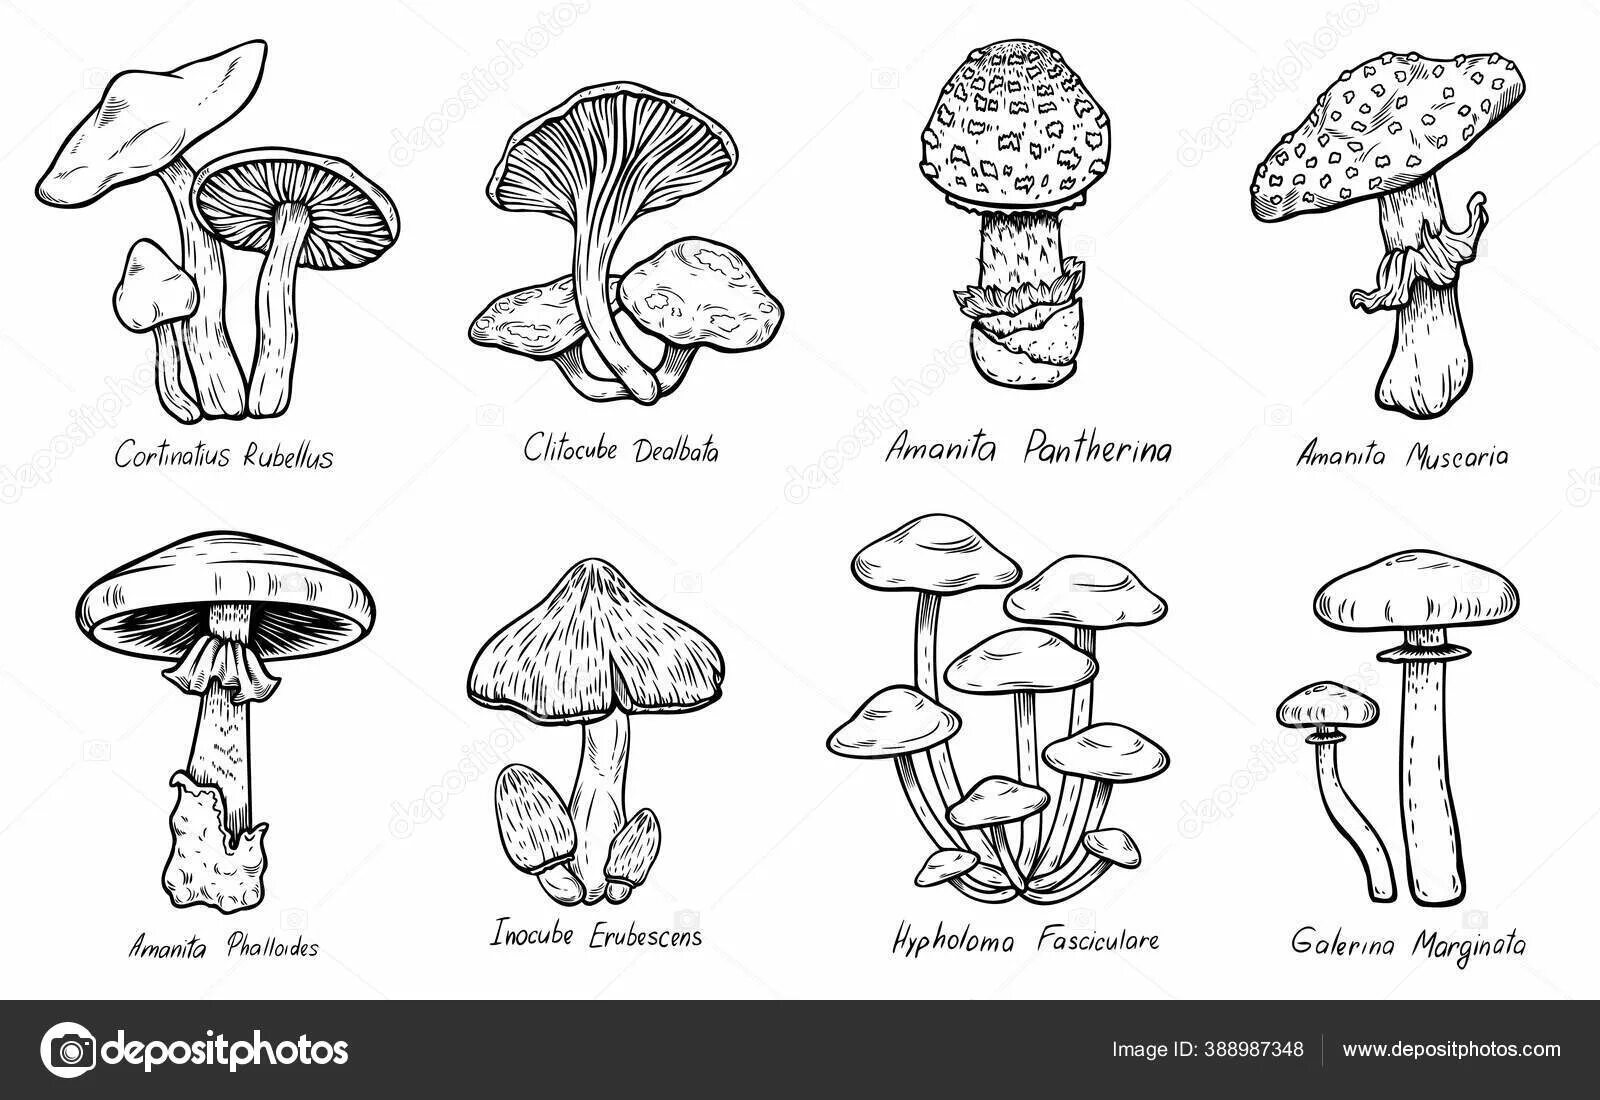 Mushrooms, edible and poisonous #12